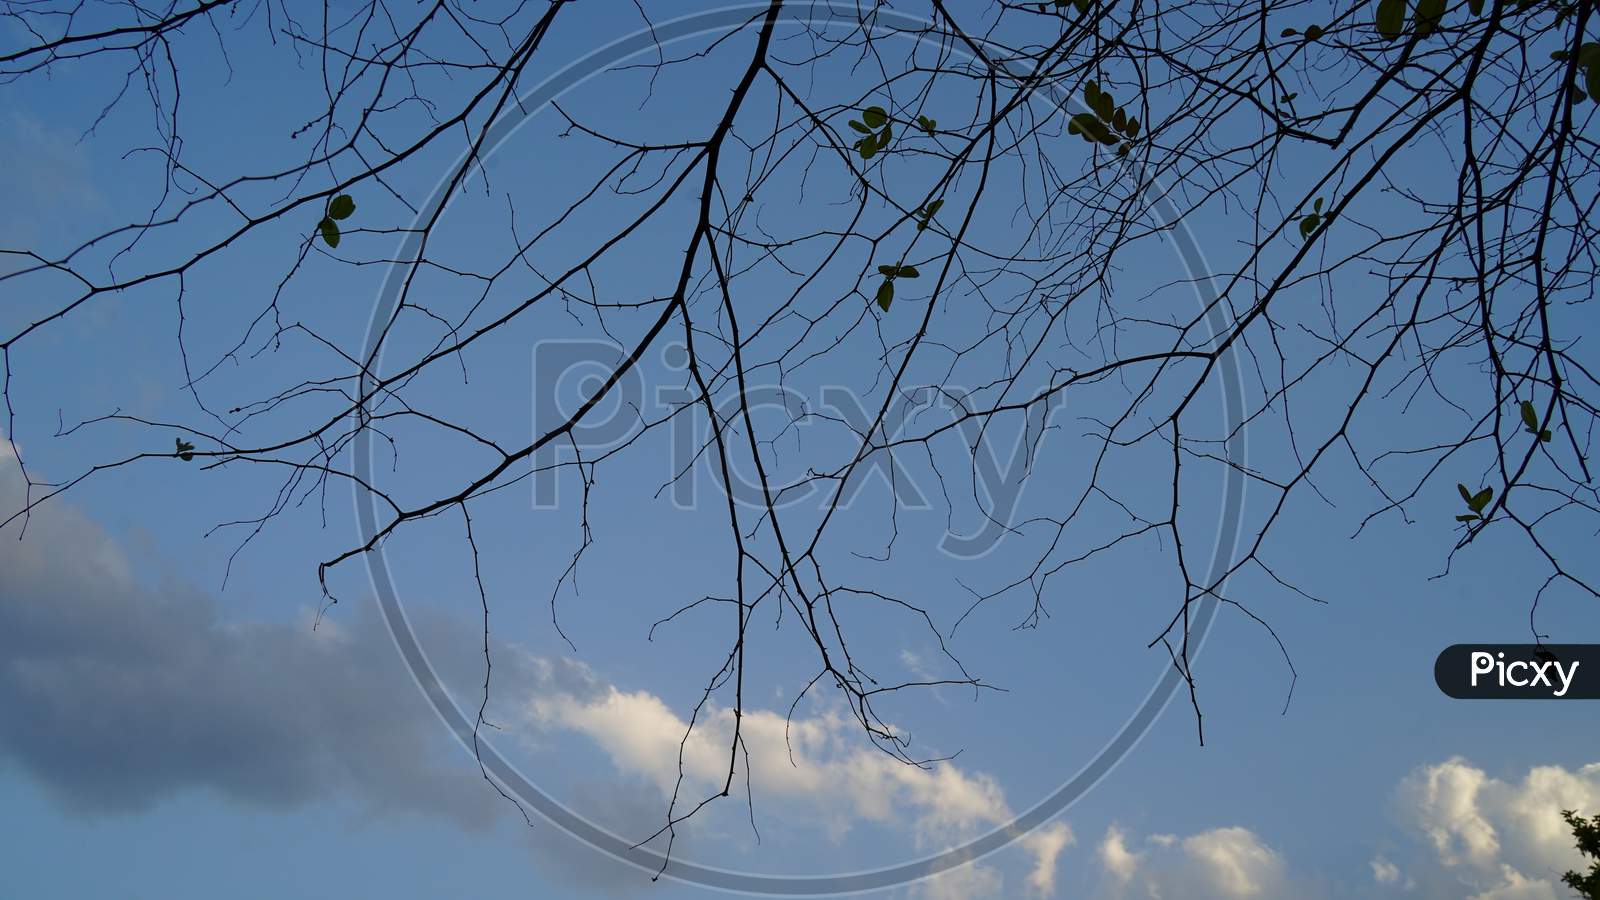 Dry Twigs, Dry Tree And Blue Sky. Leafless Tree And Blue Sky With Clouds